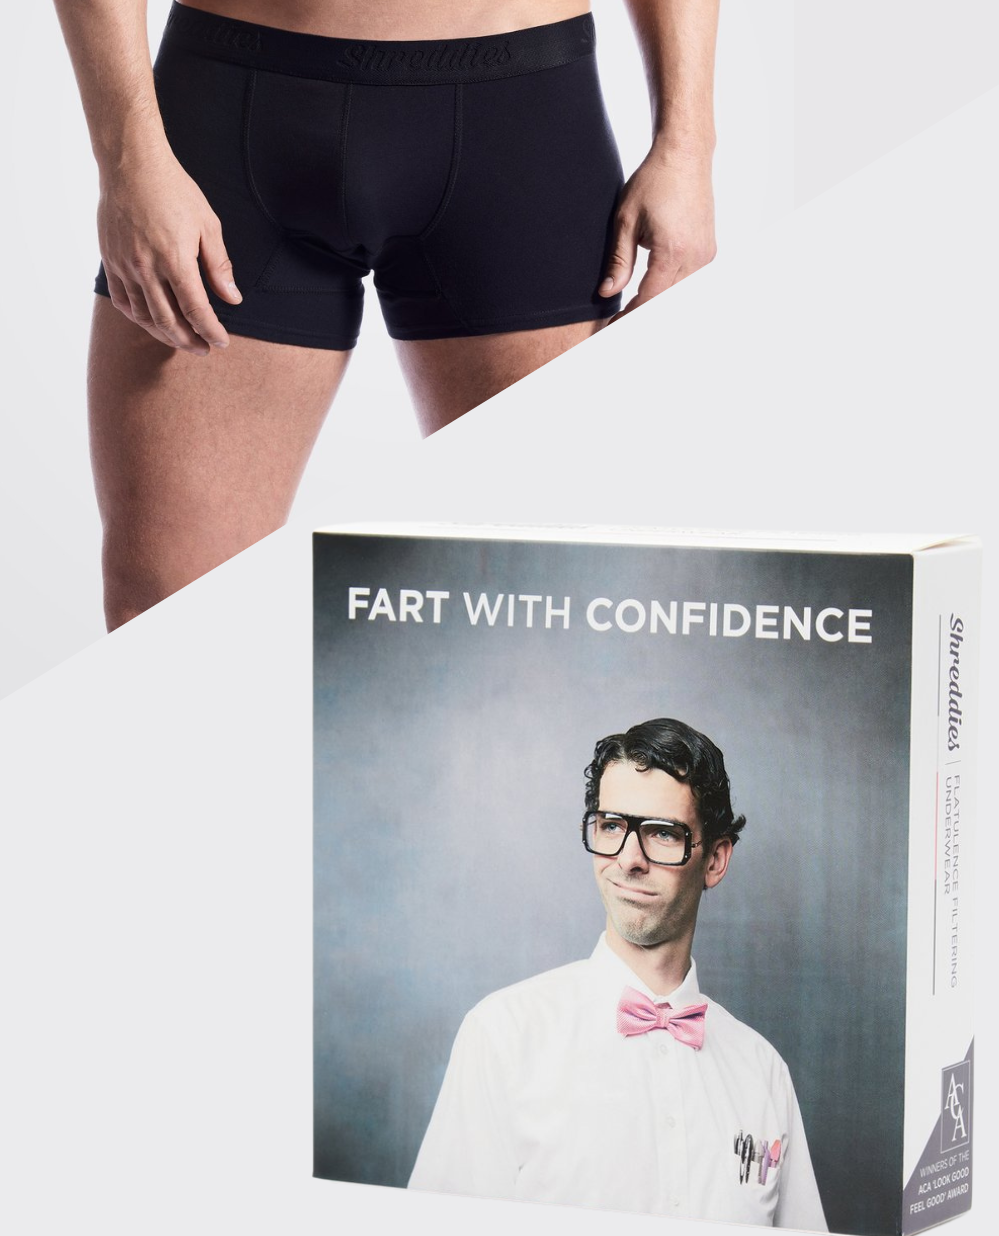 This New Underwear Is Scientifically Designed to Hide Your Farts